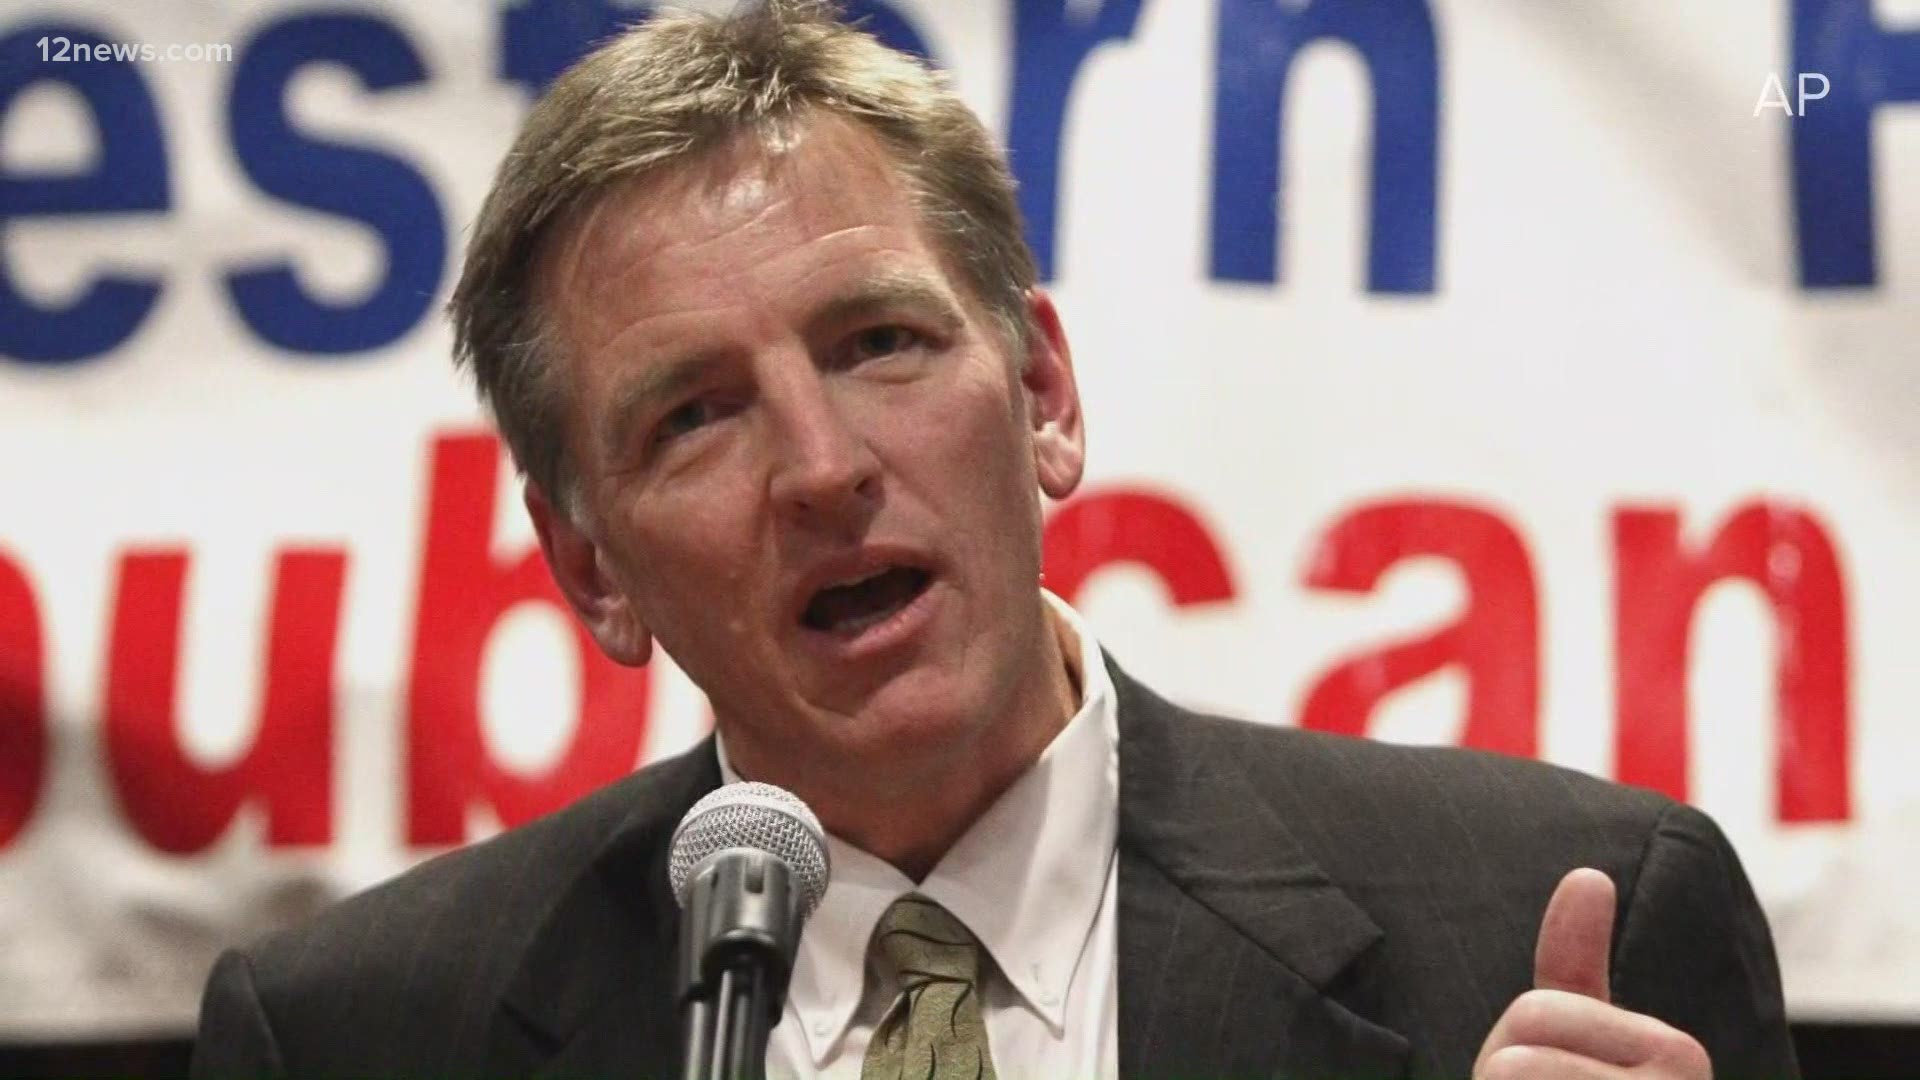 Congressman Paul Gosar headlined a white supremacist group's annual convention over the weekend. Gosar's presence at the convention boosts the group's credibility.